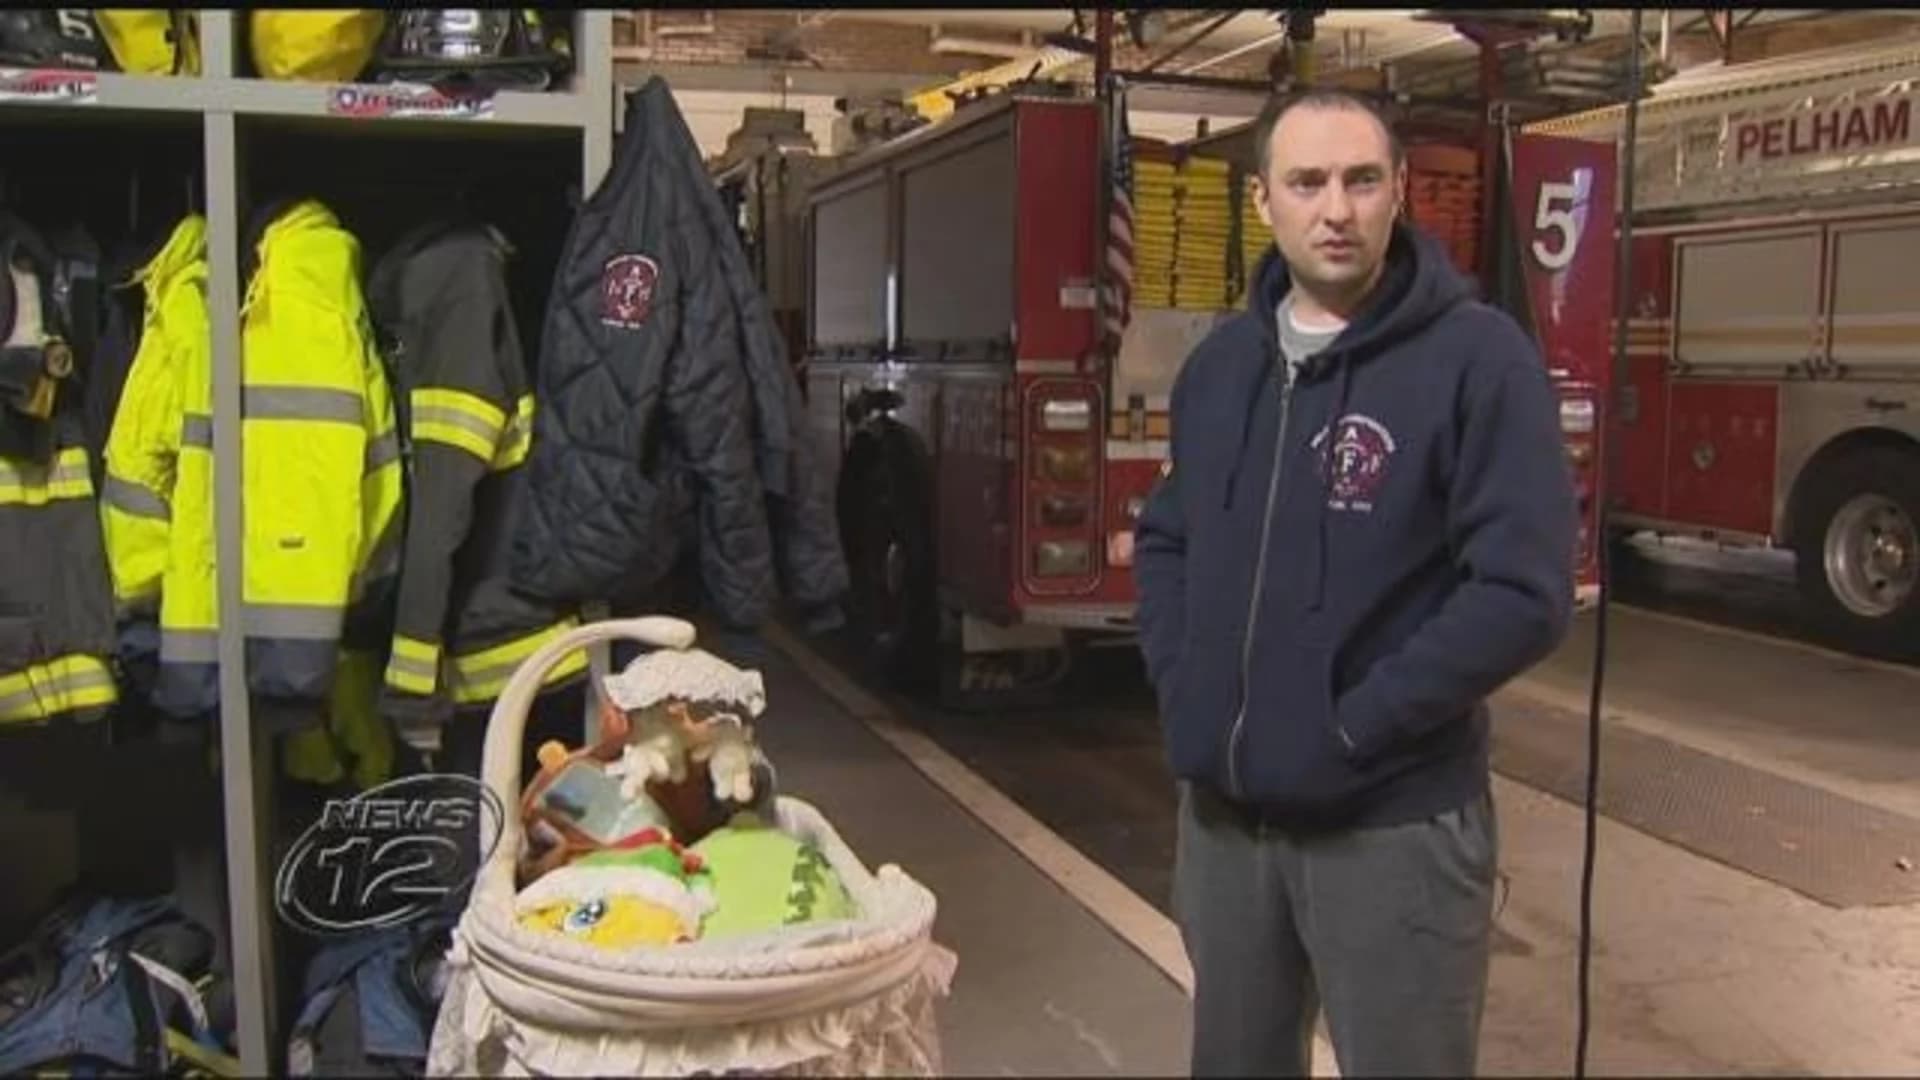 Pelham firefighters step up to help ‘brother’ who lost everything in fire